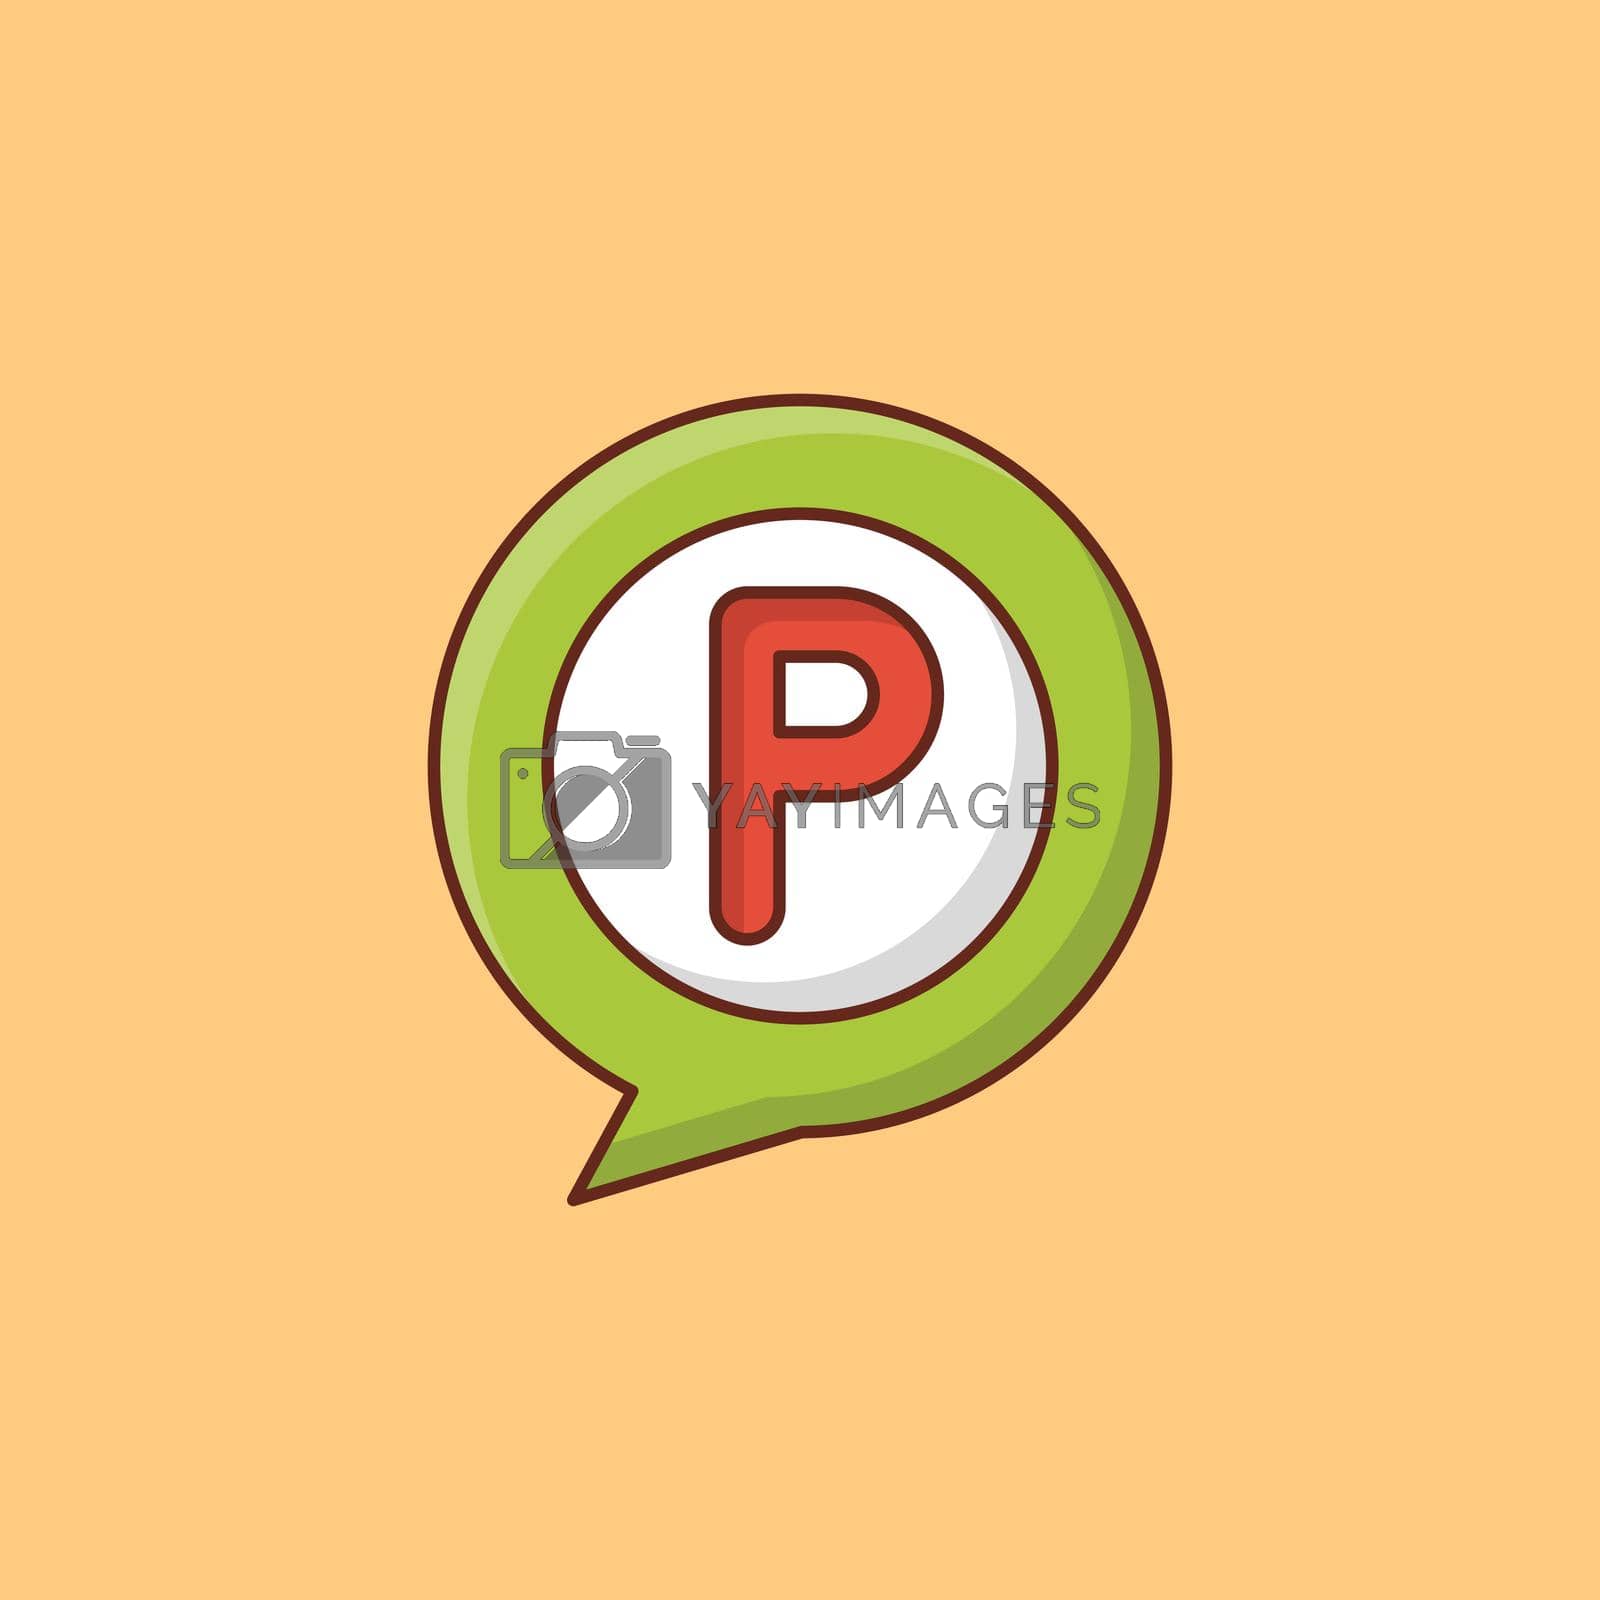 Royalty free image of parking by FlaticonsDesign